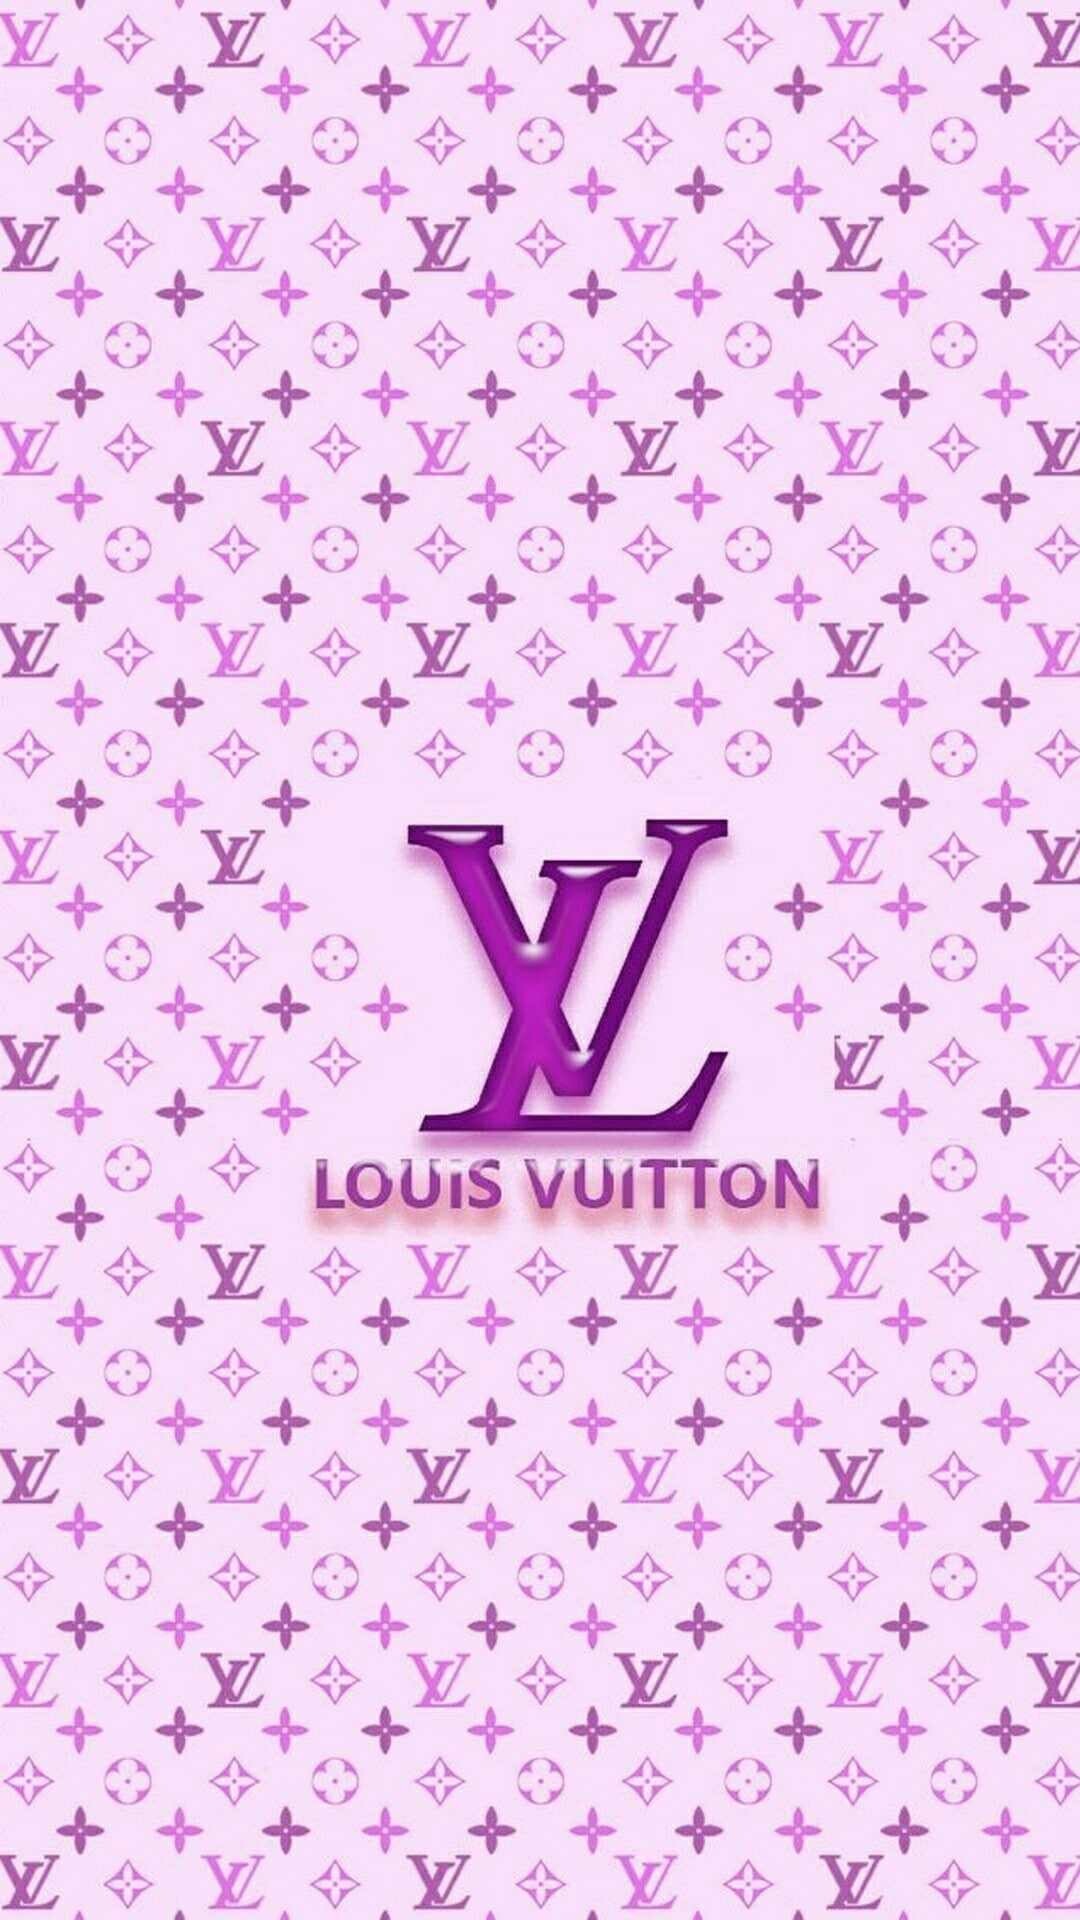 Louis Vuitton: The brand collaborated with Bob Wilson for its Christmas windows scenography in 2002. 1080x1920 Full HD Wallpaper.